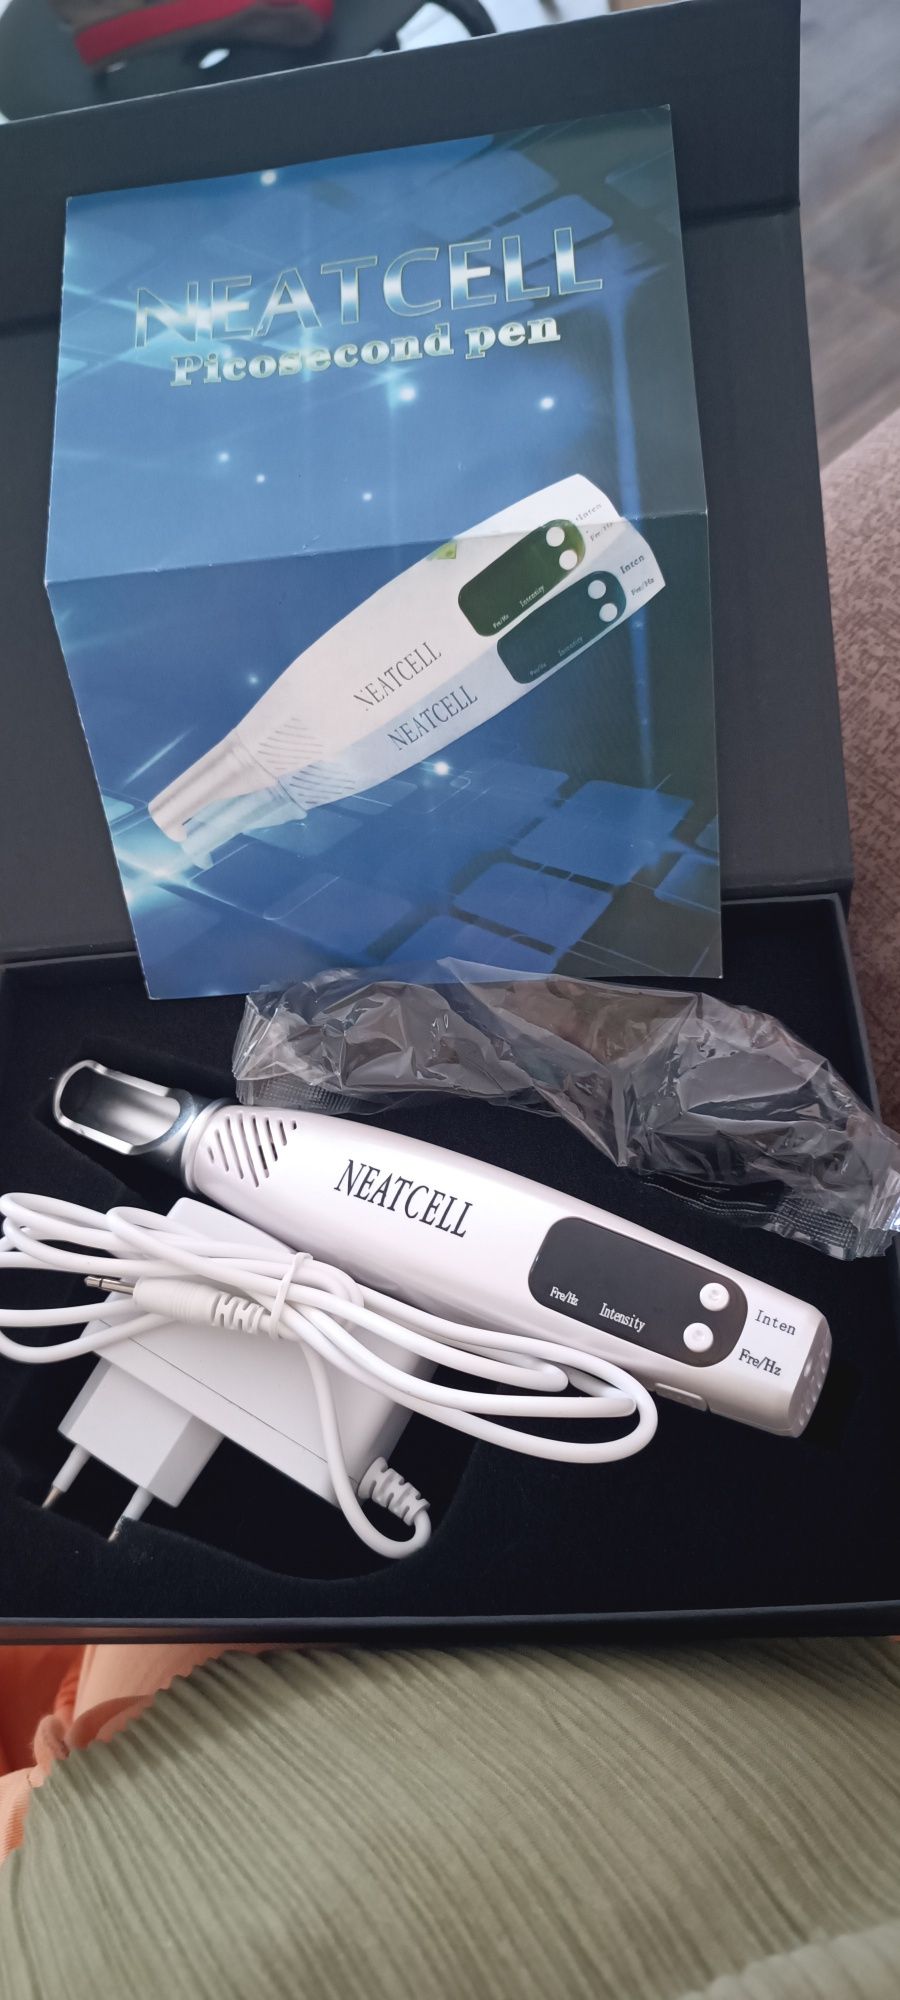 NEATCELL Picosecond Skin Laser